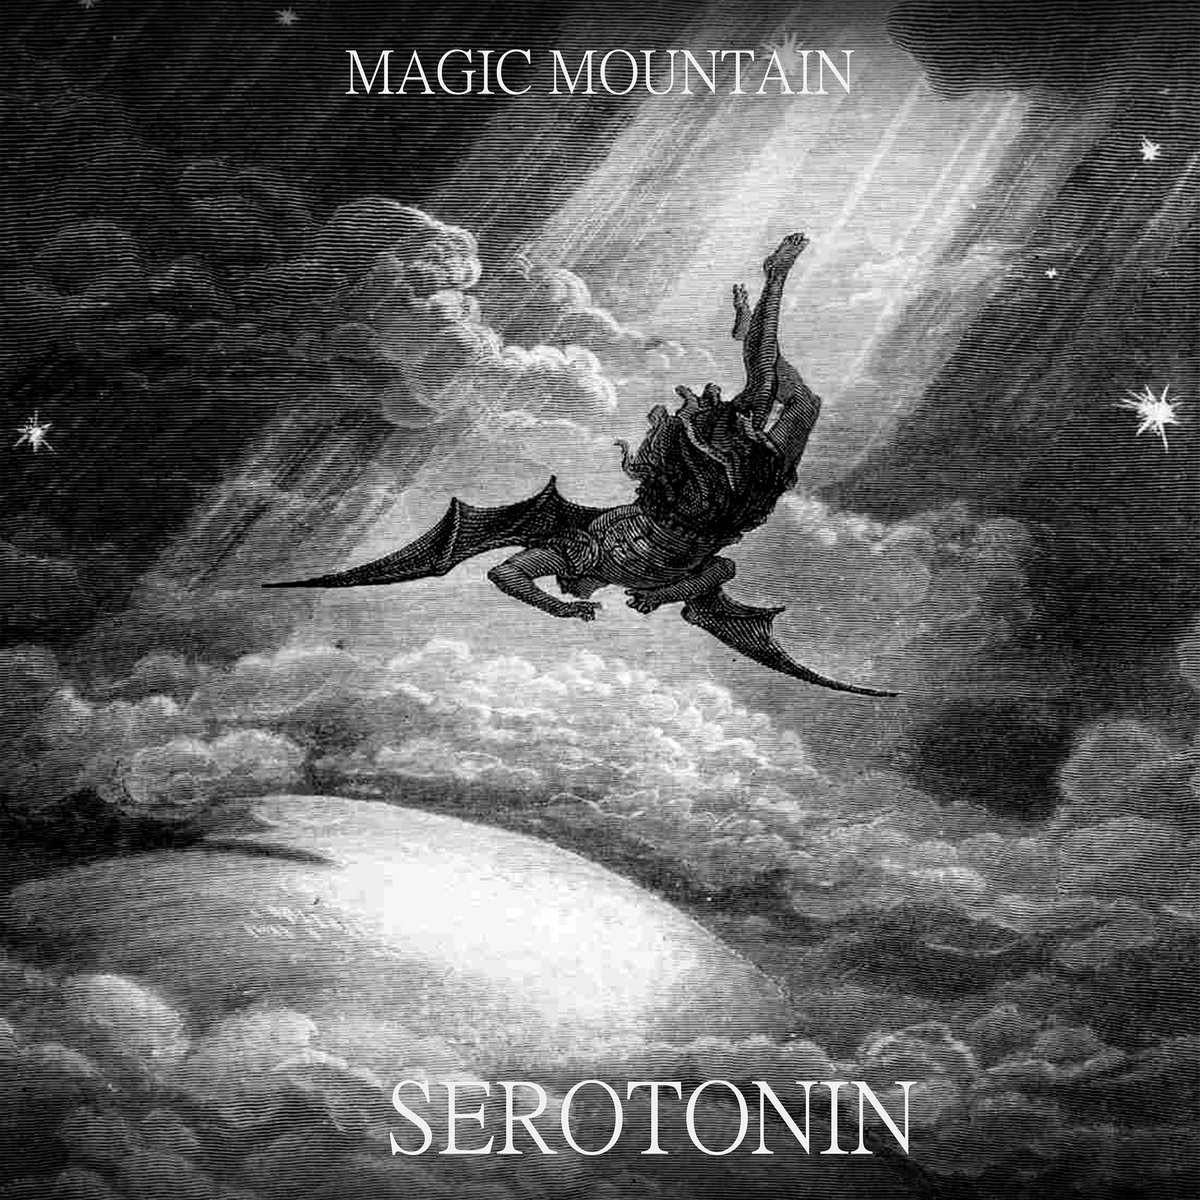 Our new song Serotonin produced by @KJAMMrecords is out now. magicmountain.bandcamp.com/track/serotonin